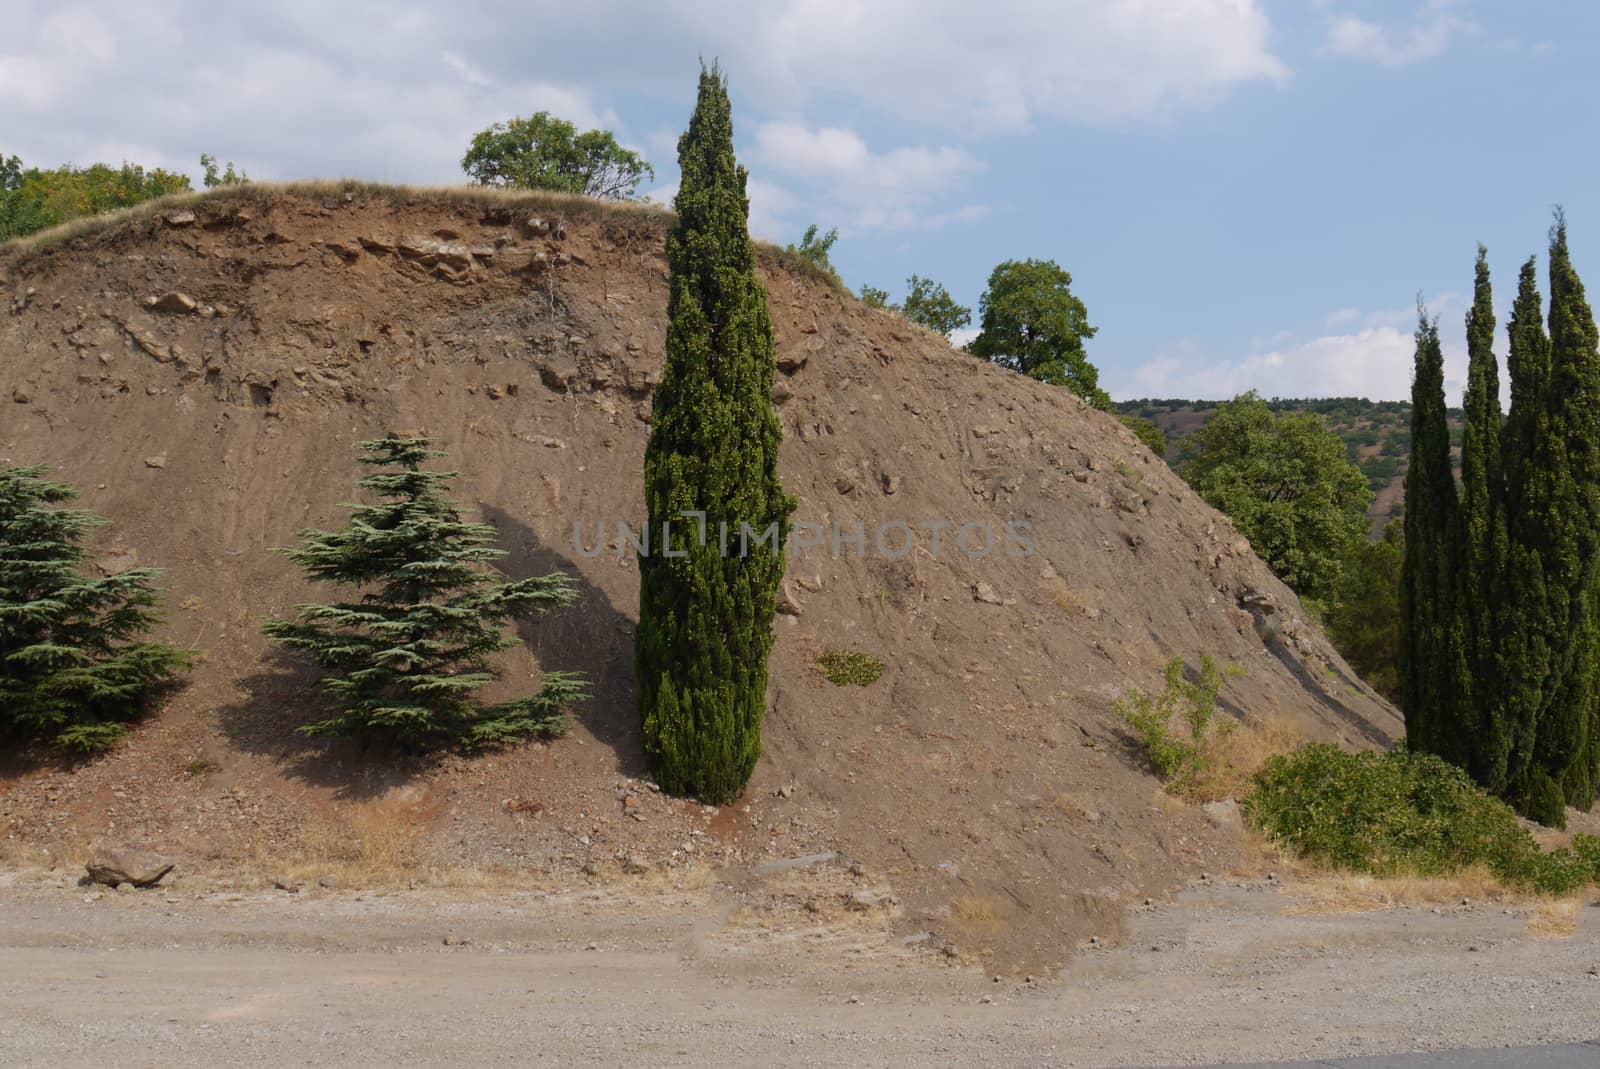 A small clay-sand hill with a high sharp bush and several pines on it by Adamchuk